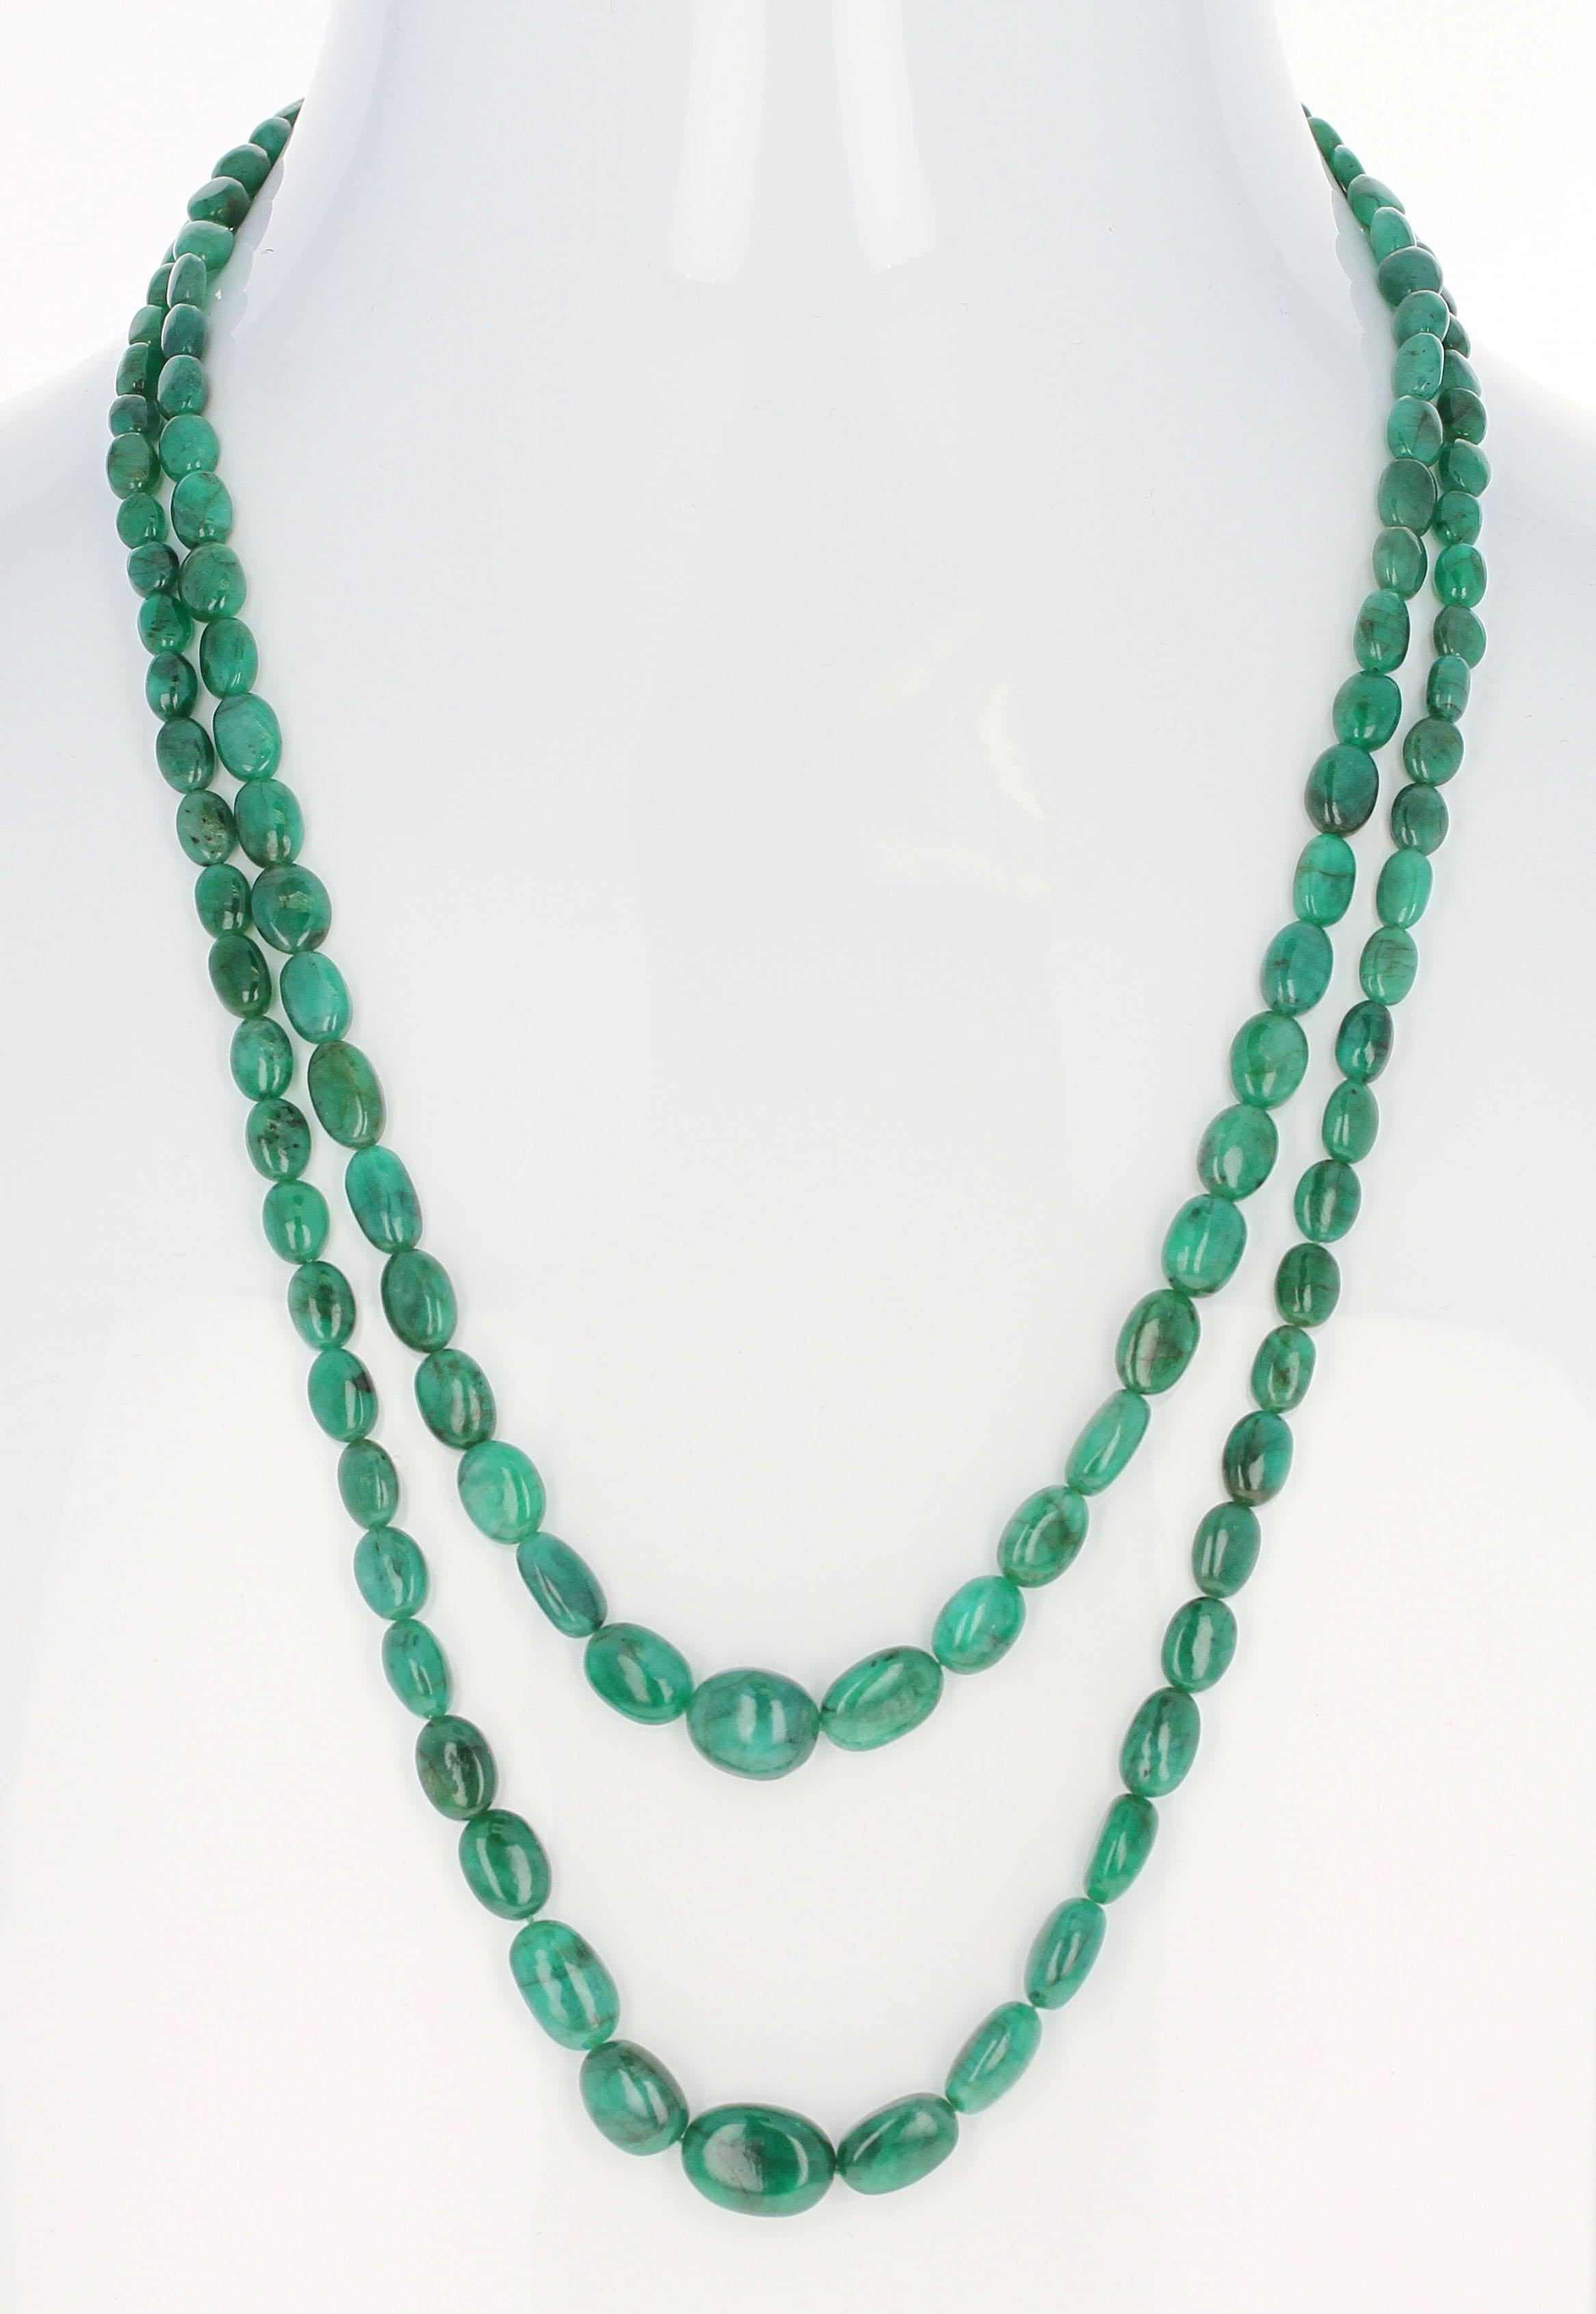 A necklace with Double Strands of Emerald Smooth Tumbled Beads with a Silver Toggle Clasp. Length: 17.5